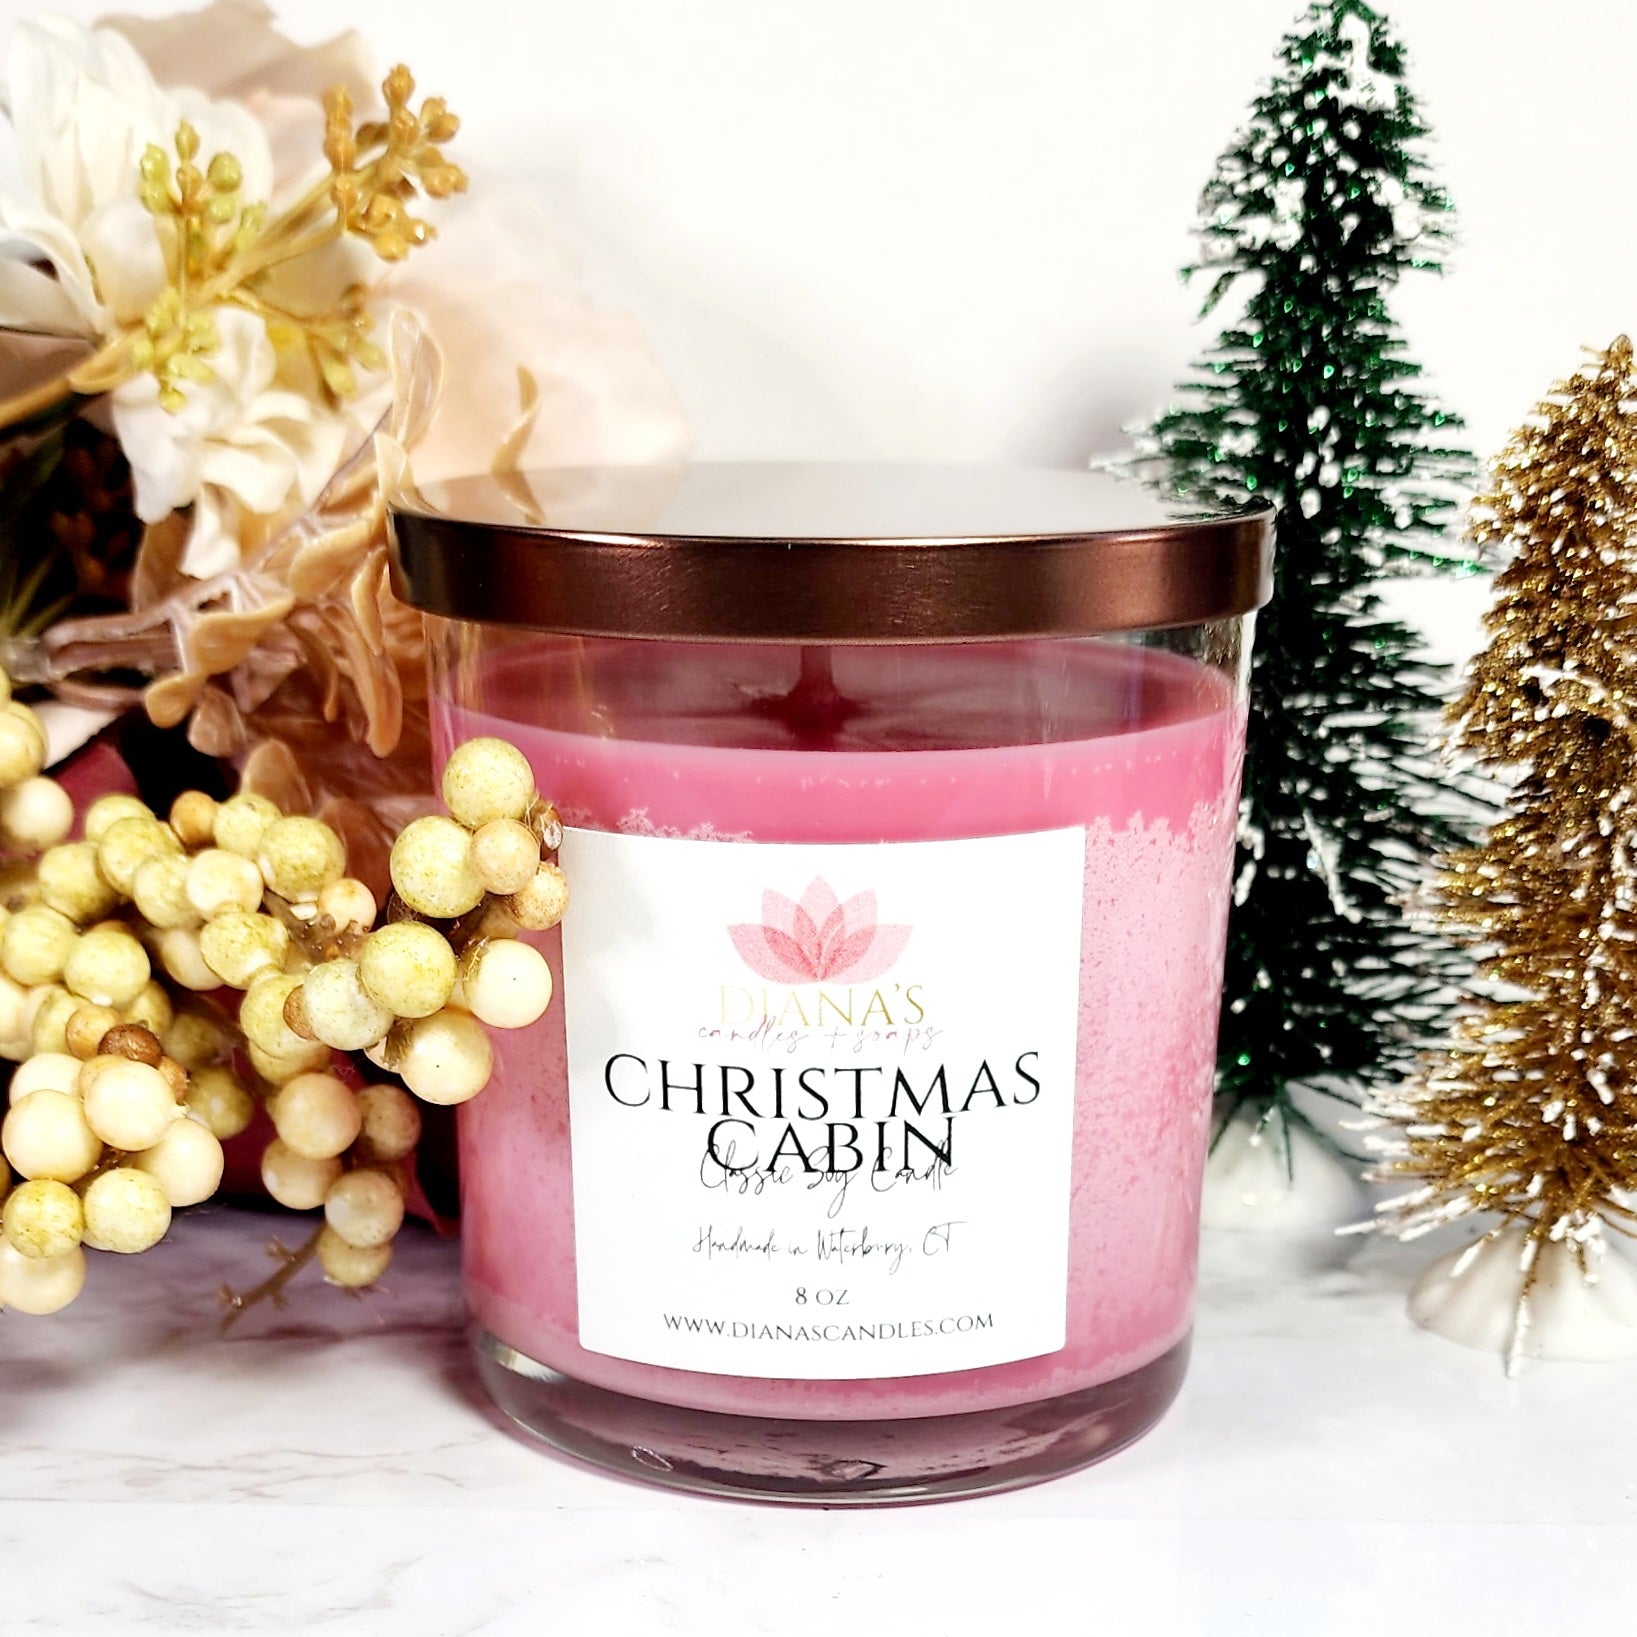 Christmas Cabin Candle - Diana's Candles and Soaps 